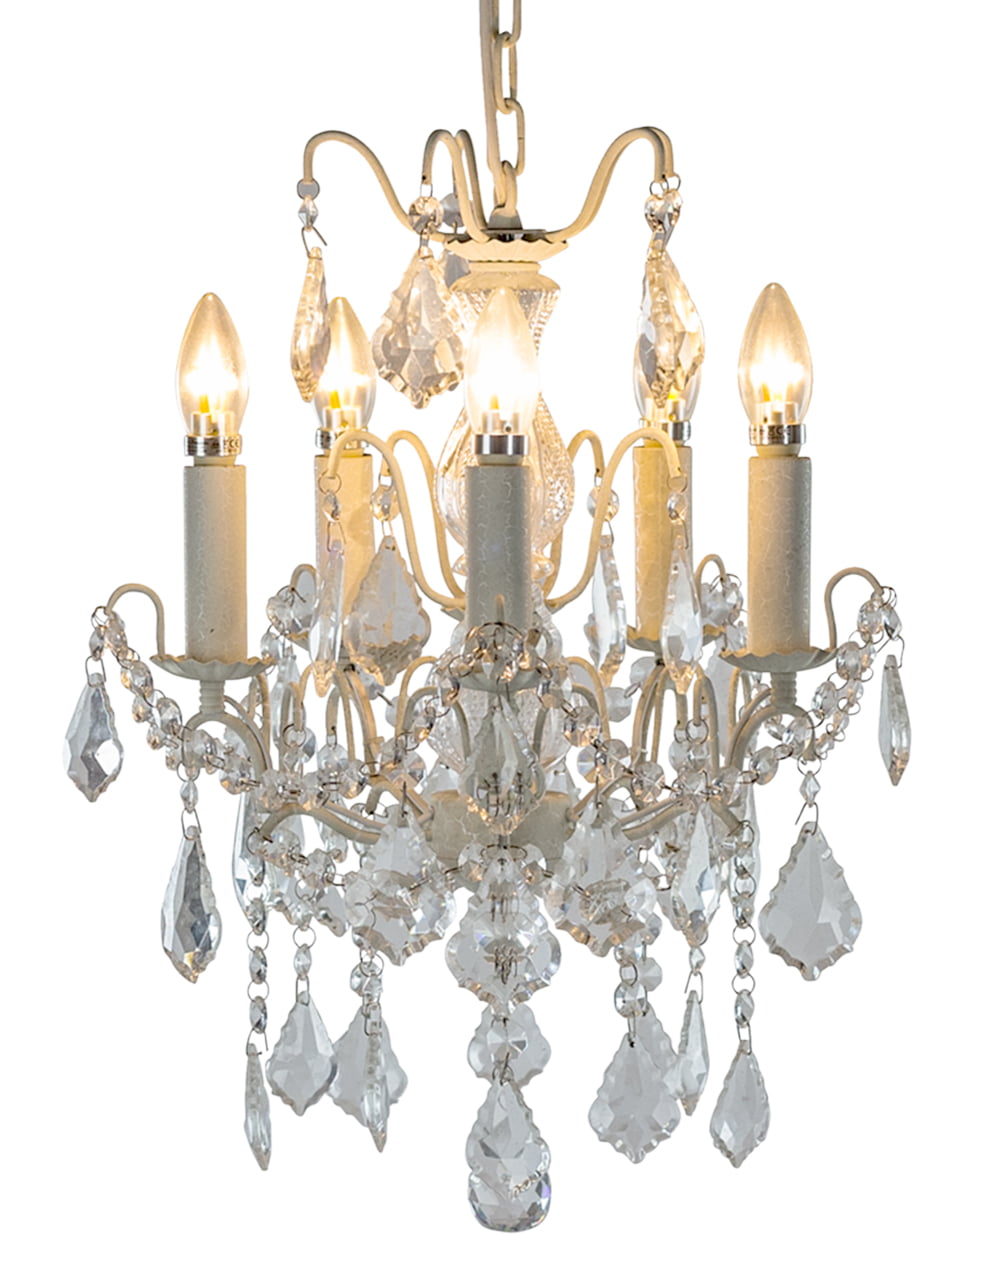 Antique Crackle White 5 Branch French Chandelier - Diana Casa